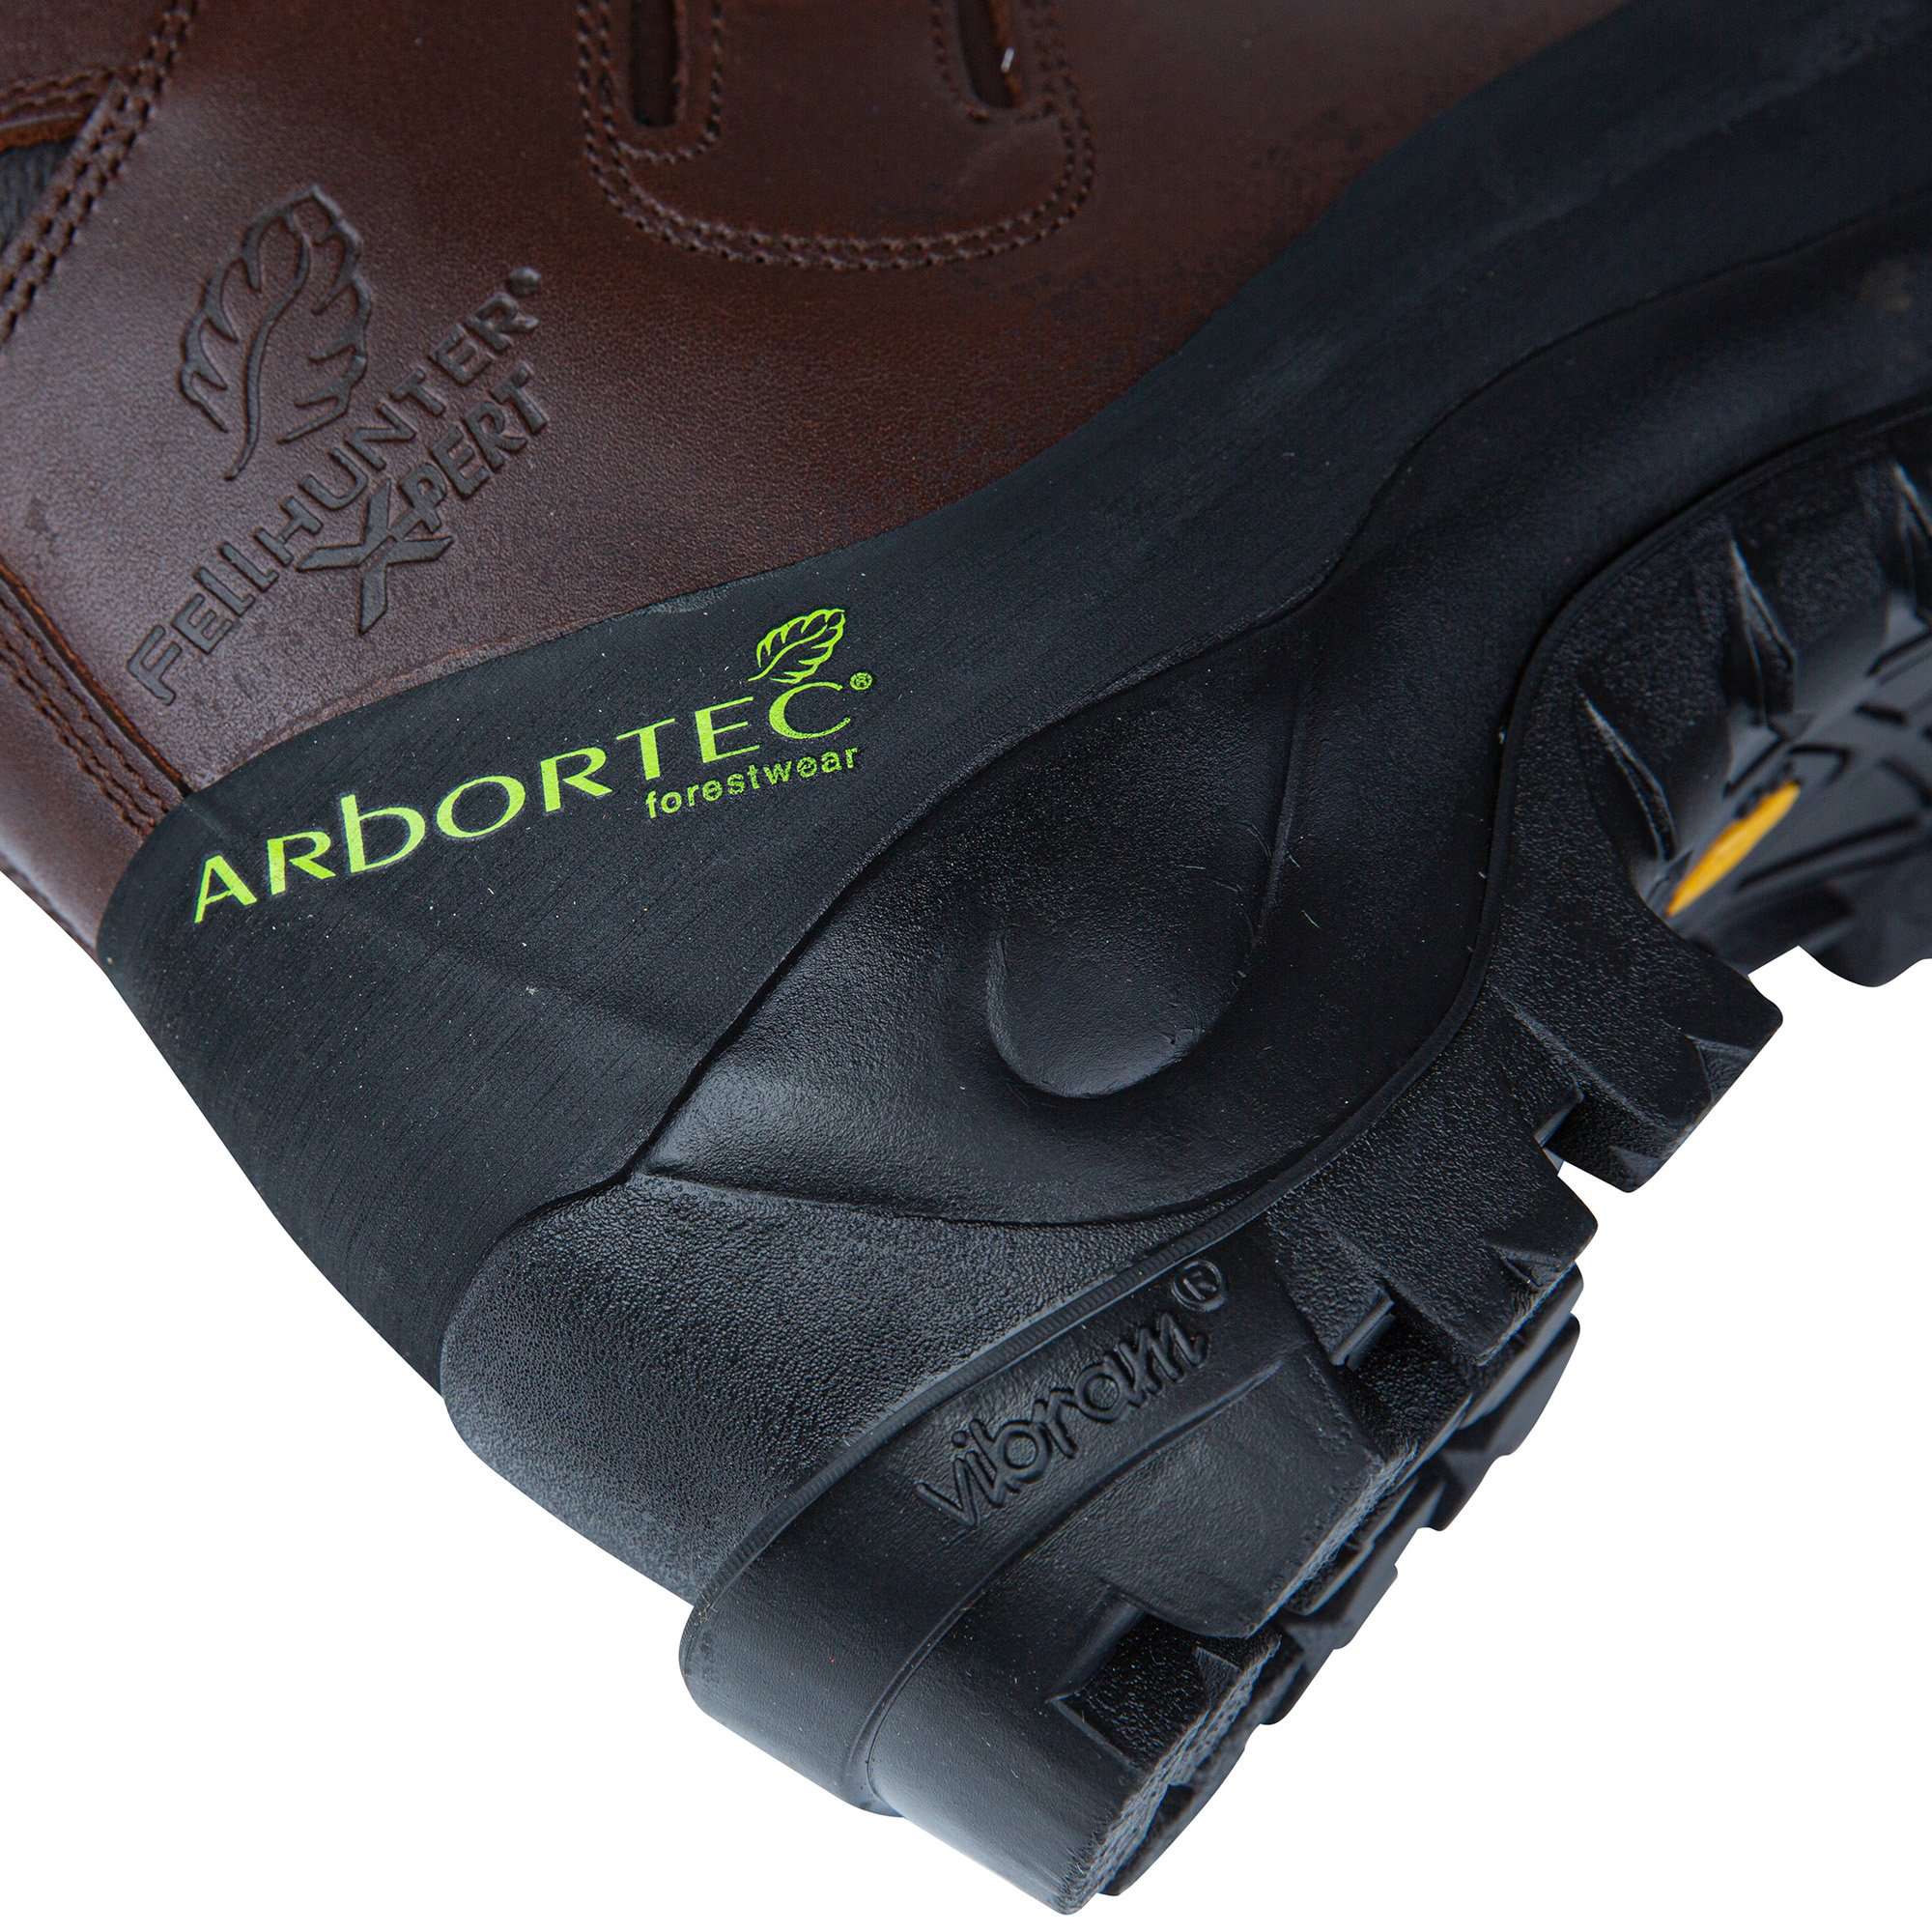 Fellhunter Expert Class 3 Chainsaw Boot - AT36500 - Arbortec Forestwear